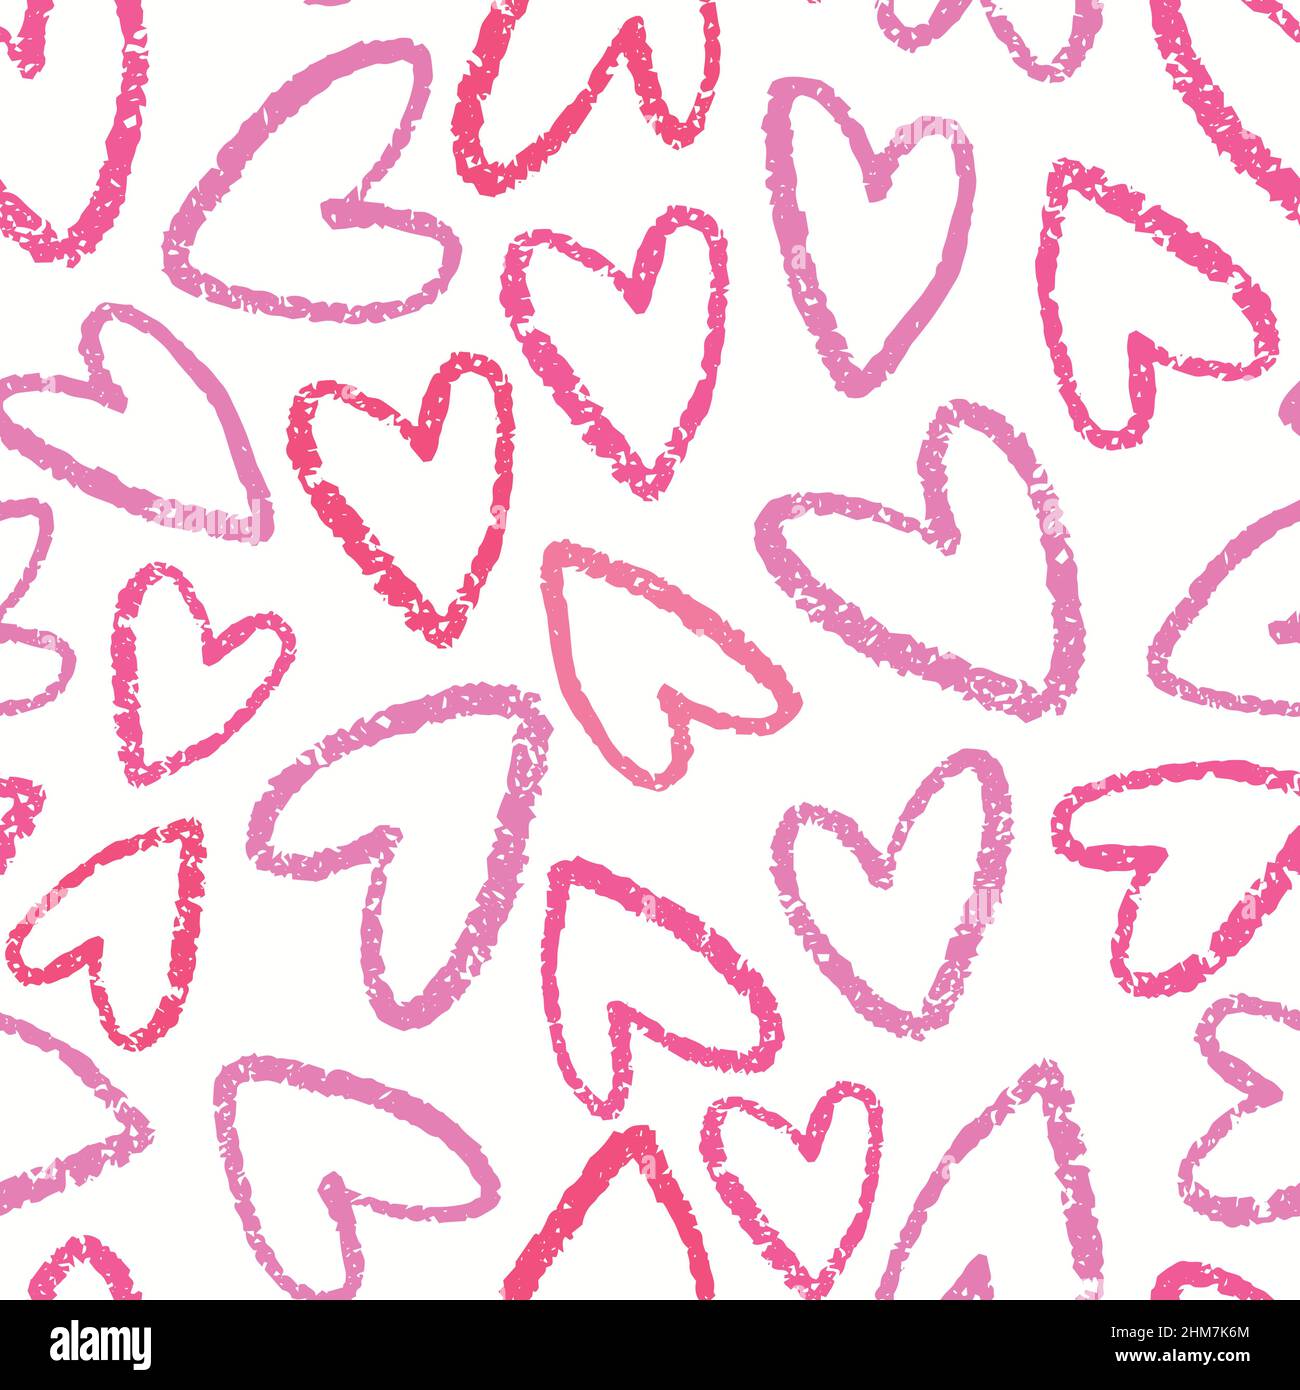 Premium Vector  Seamless pattern with cute colorful hearts valentine's day  print design for fabric wrapping paper